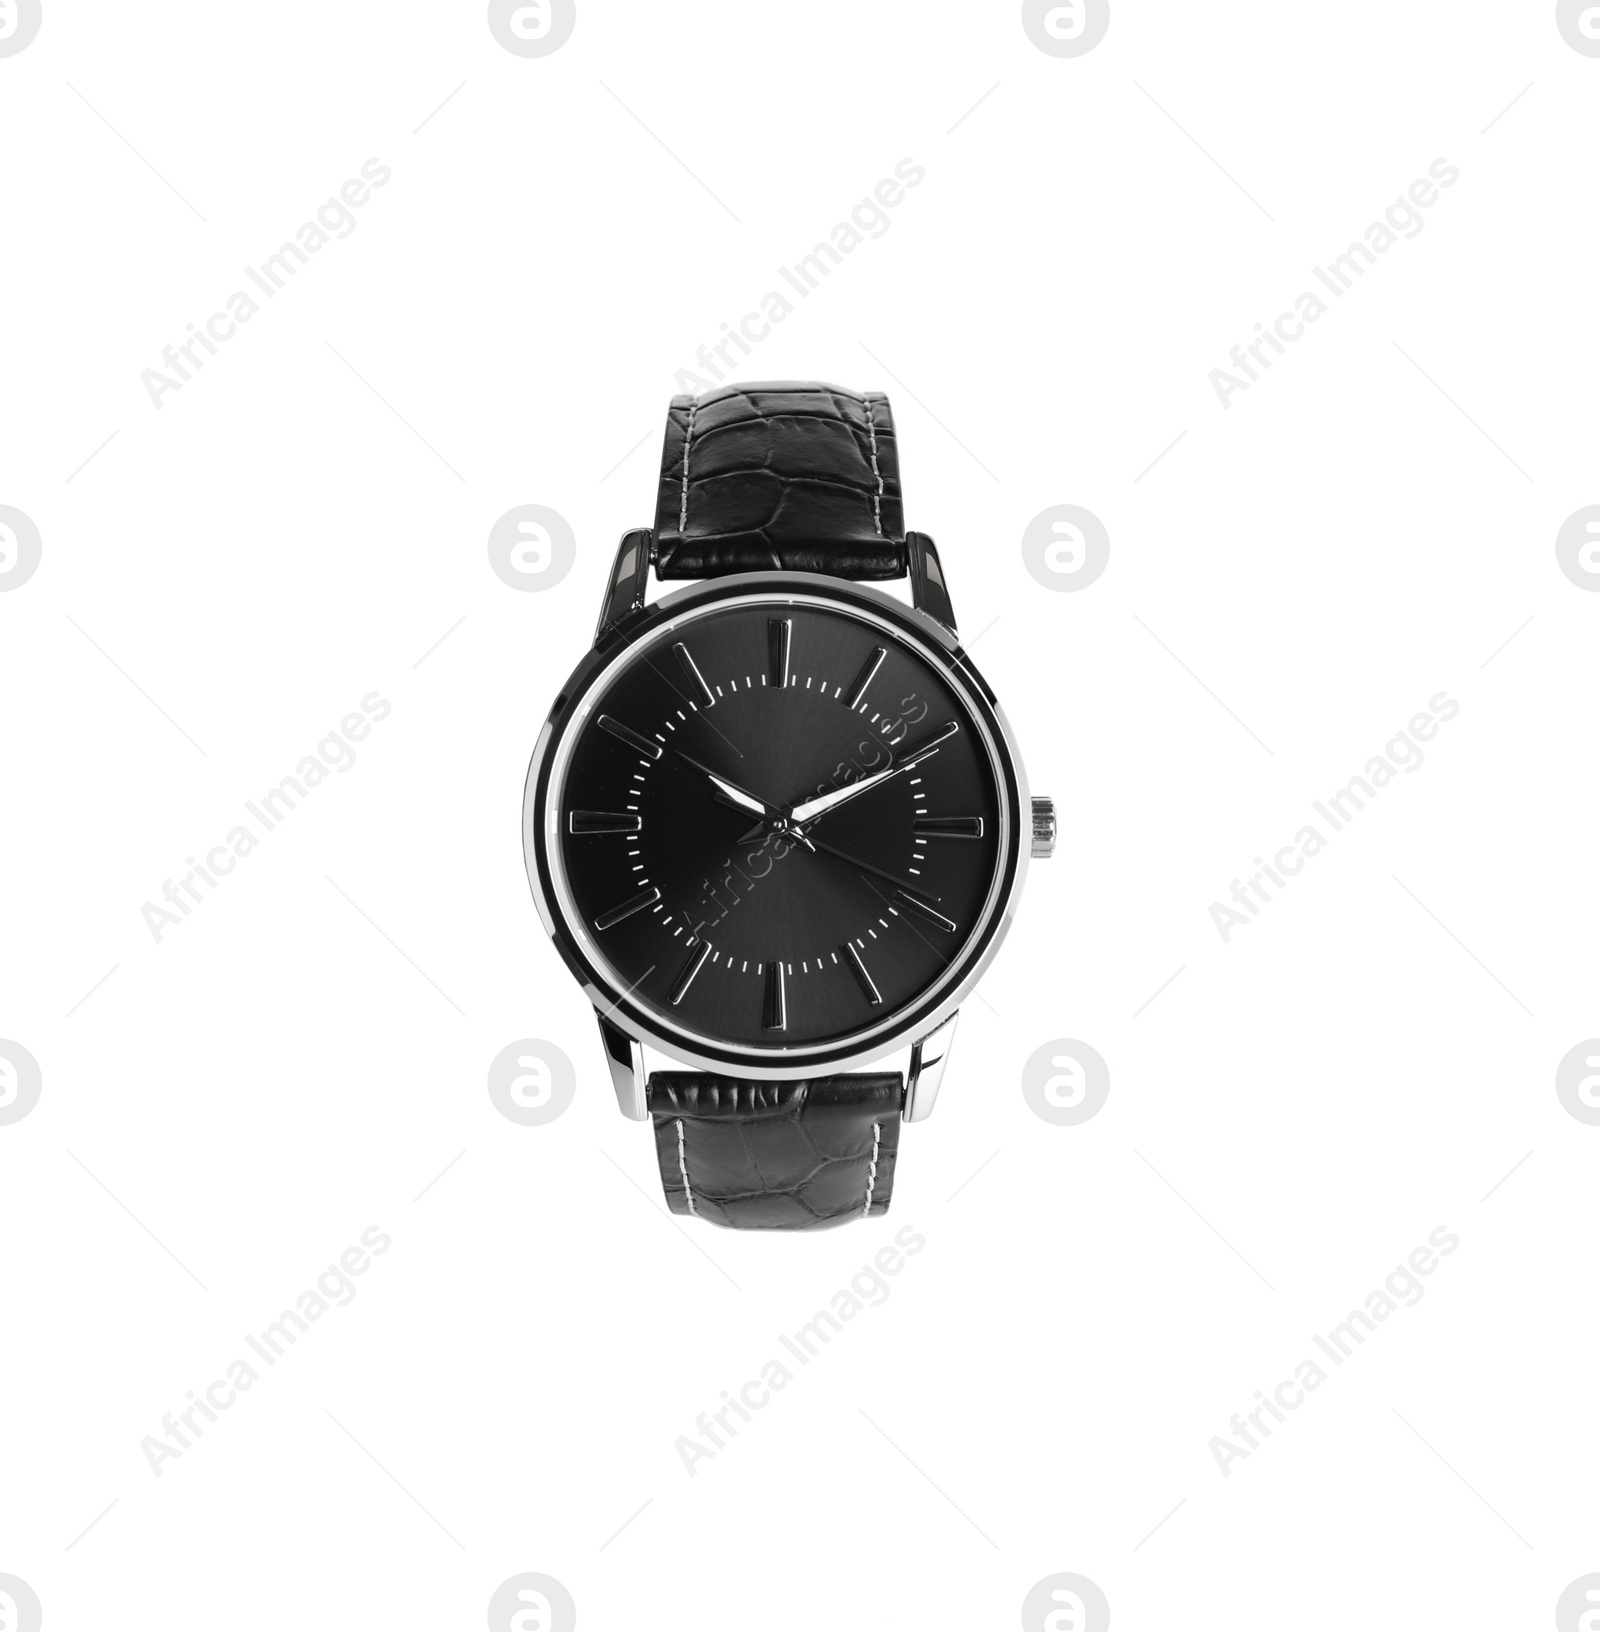 Photo of Black luxury watch with leather band isolated on white